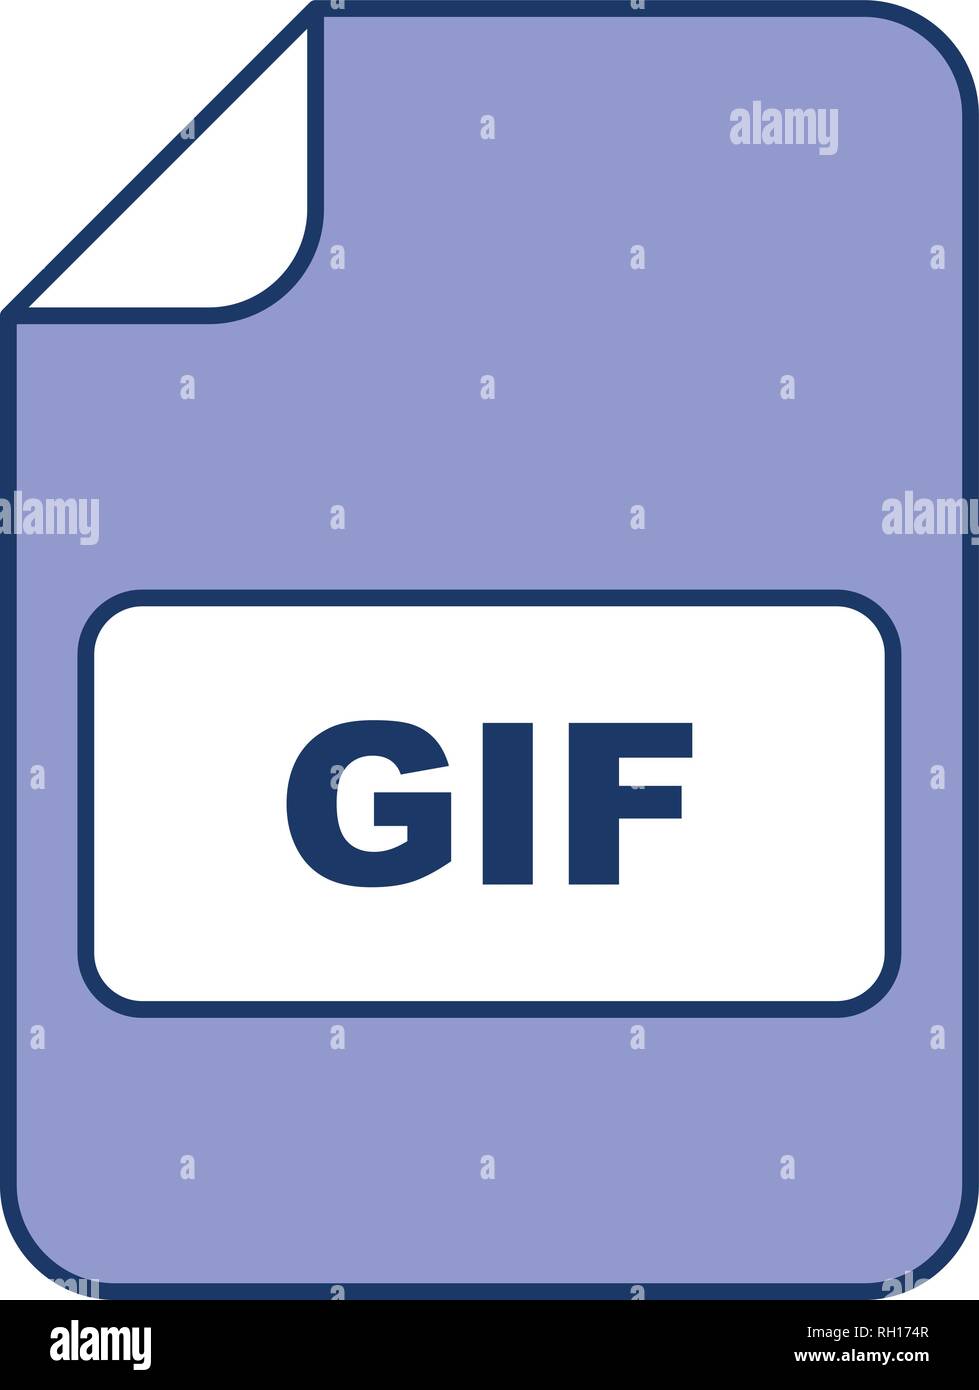 File Format Gif Document Extension File Format Vector SVG Icon - SVG Repo